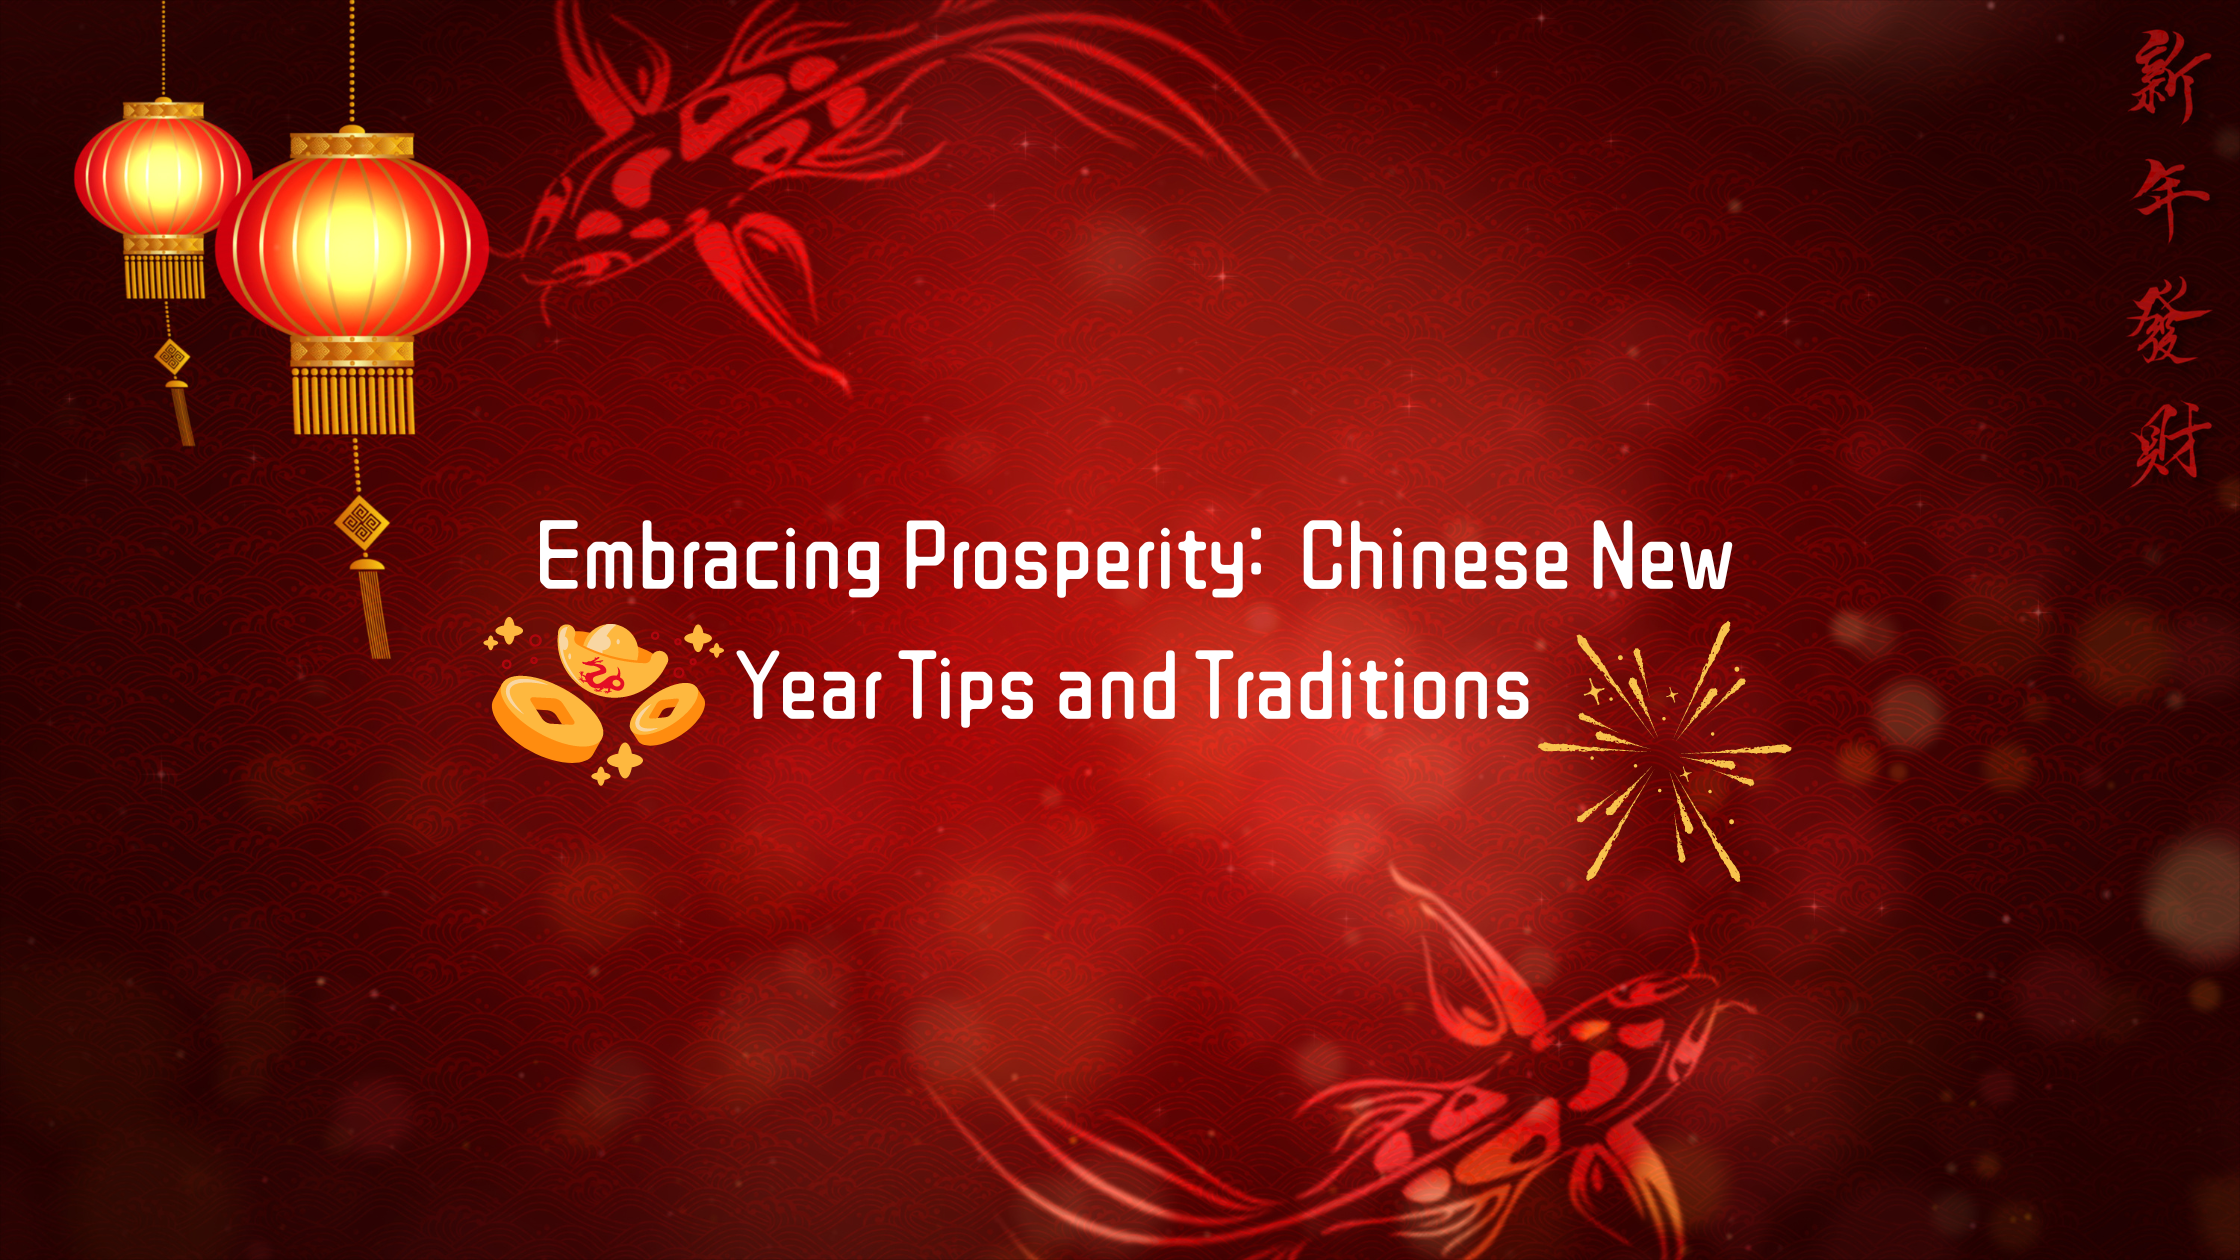 Embracing Prosperity: Chinese New Year Tips and Traditions